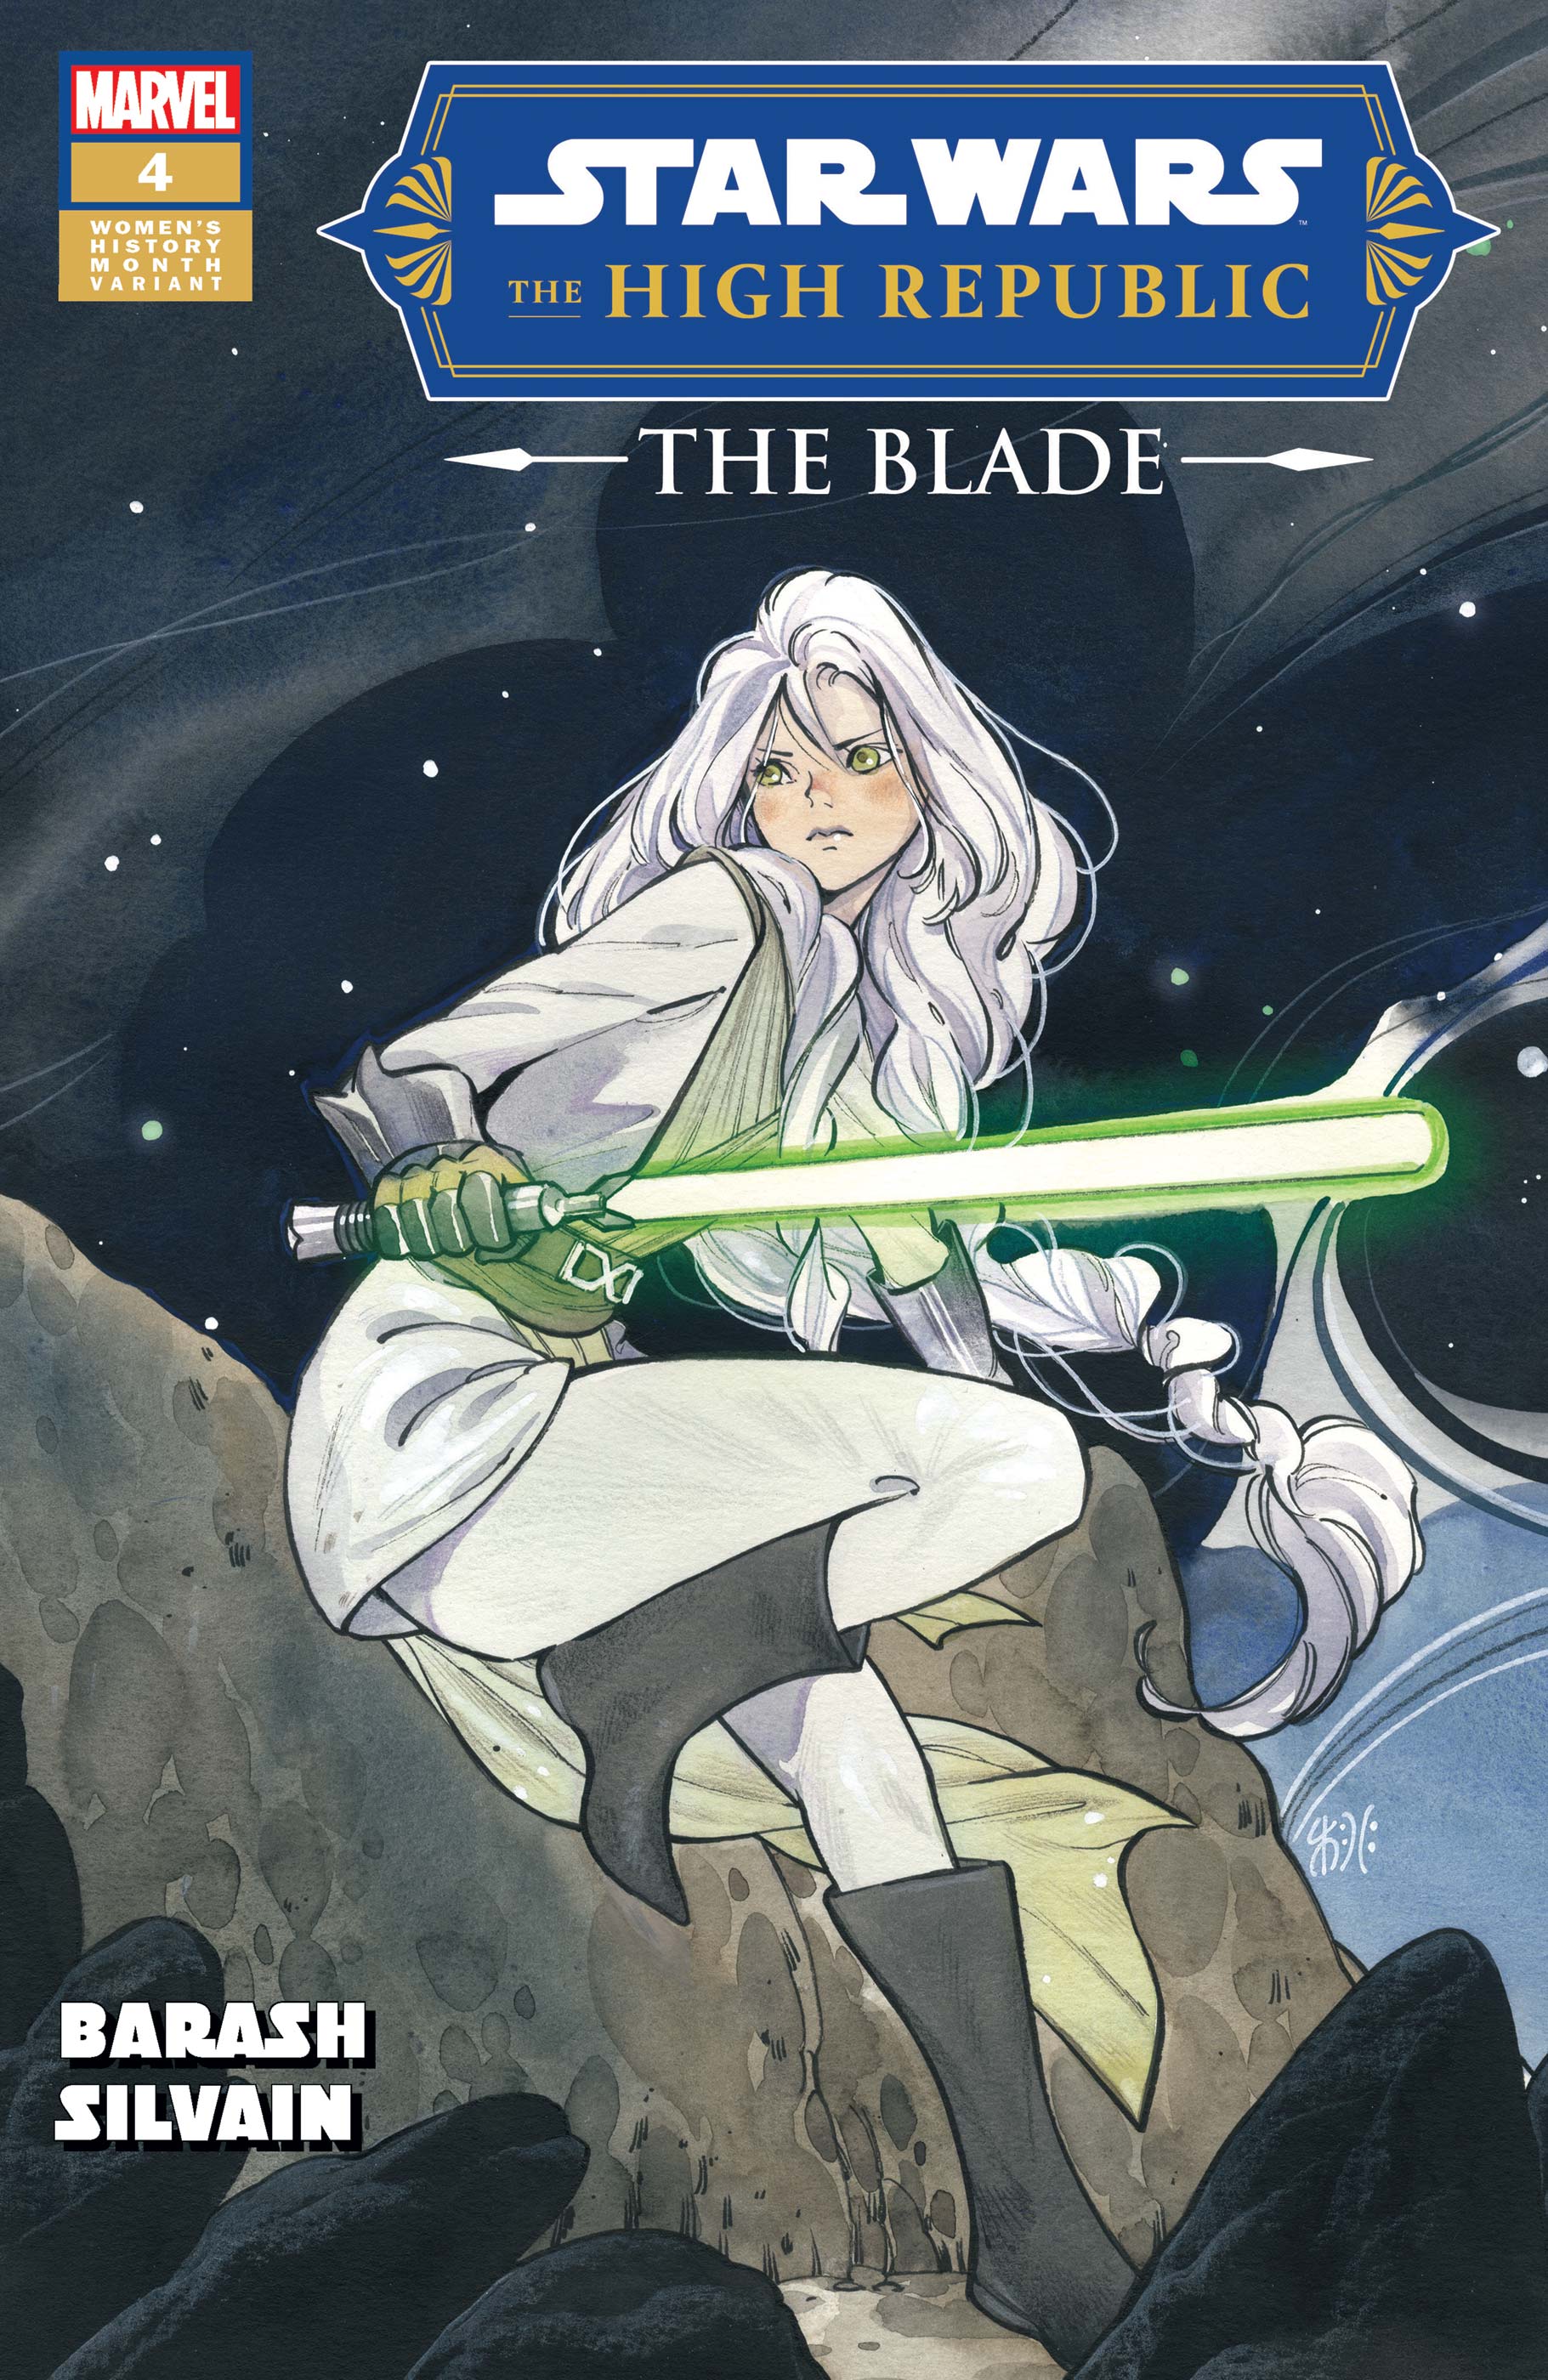 The High Republic: The Blade #4 (Peach Momoko "Barash Silvain" Women's History Month Variant Cover) (29.03.2023)